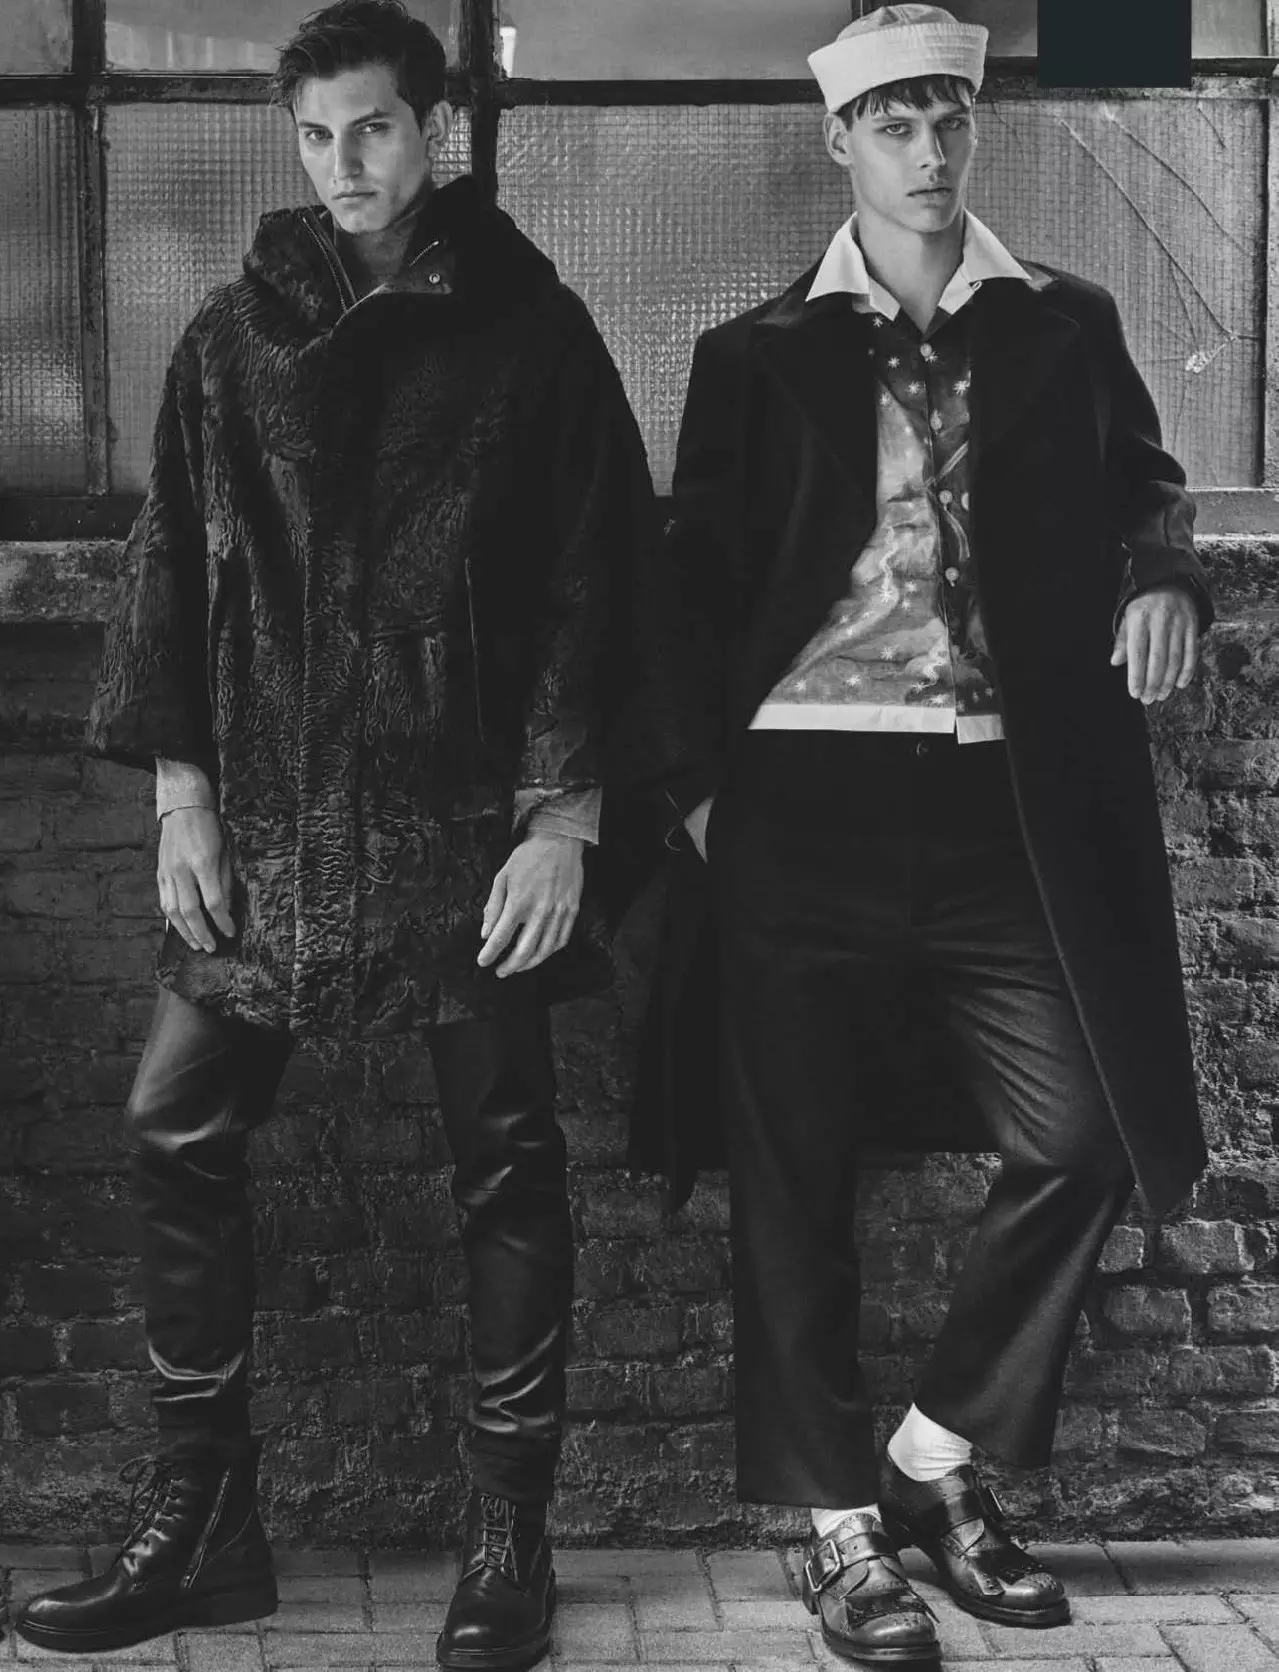 GQ UK September 2016: The GQ Collections Foto's door Giampaolo Sgura Styling door Luke Day